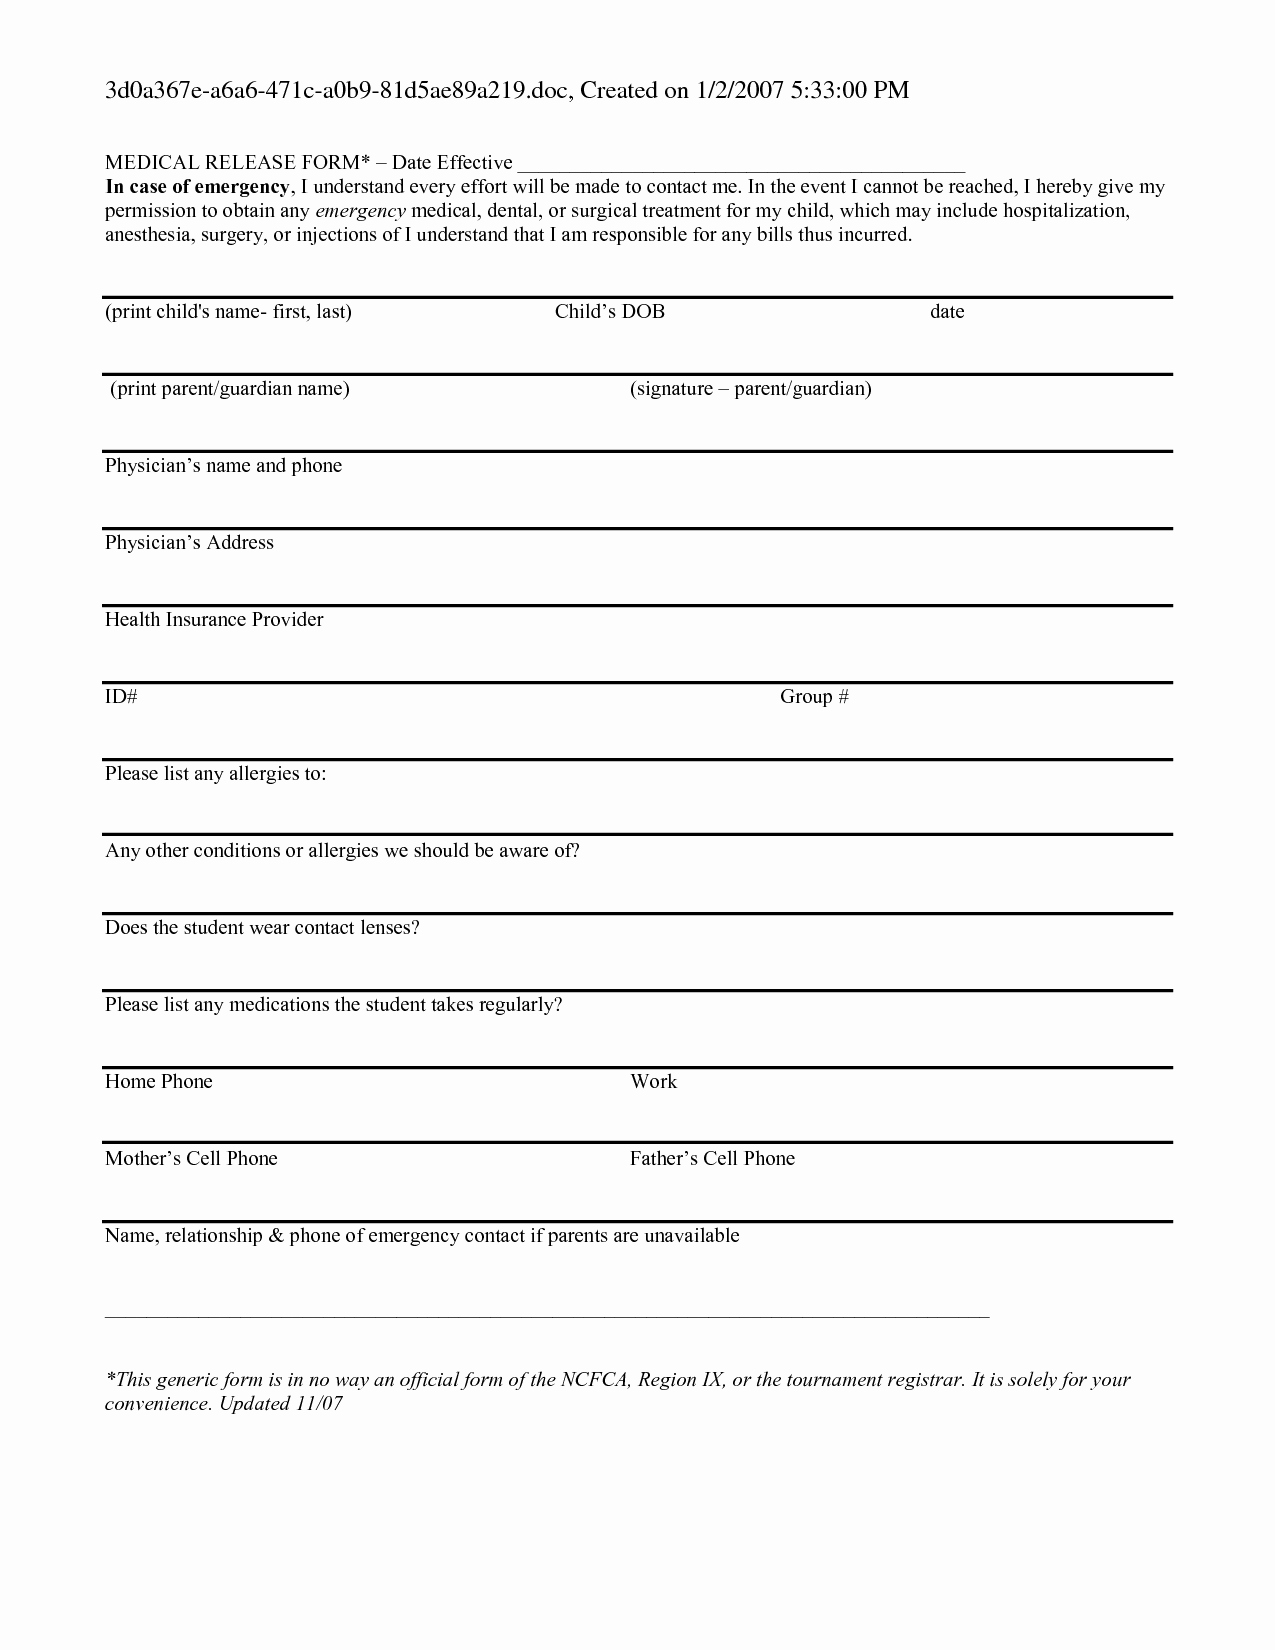 Medical Records form Template Best Of Generic Release form 9 Unconventional Knowledge About